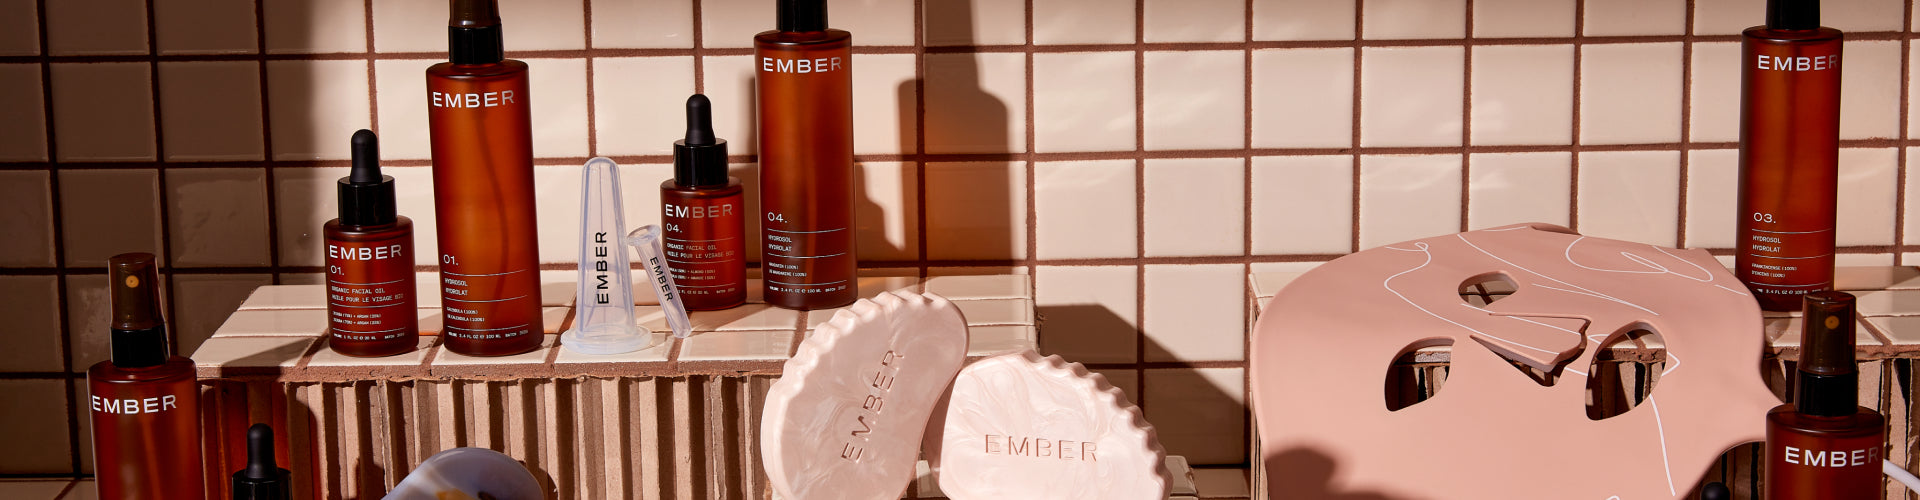 A collection of Ember products arranged on tile risers in front of a tiled background. Some products include oils, hydrosols, the LED Light Therapy Mask, cupping set and more.